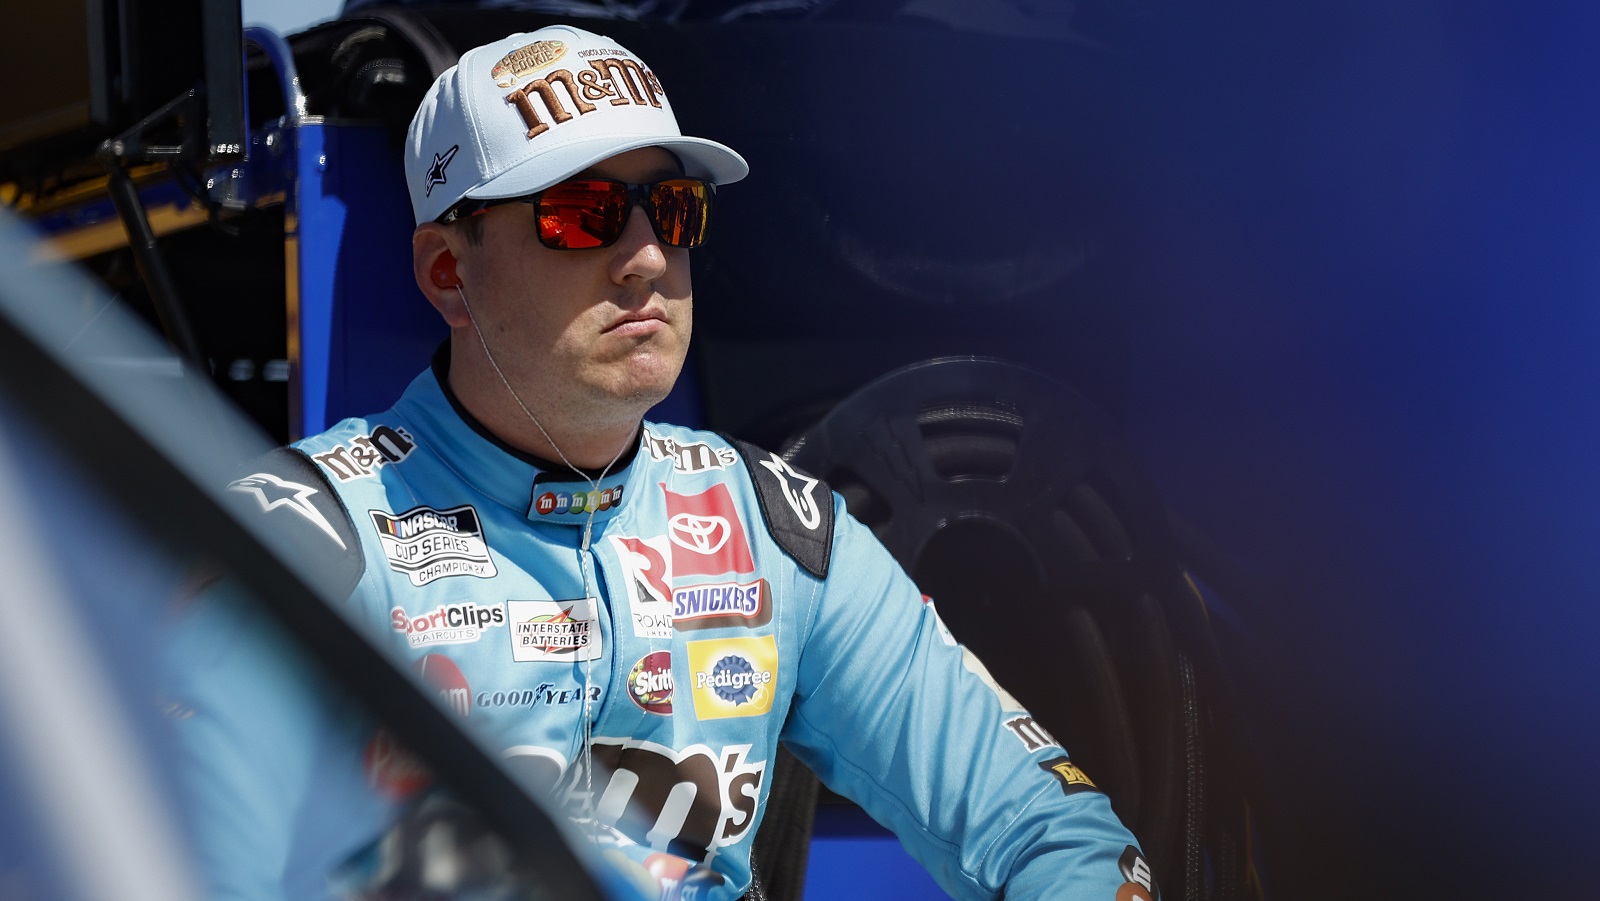 Kyle Busch waits on the grid during qualifying for the NASCAR Cup Series Toyota Owners 400 at Richmond Raceway on April 2, 2022.